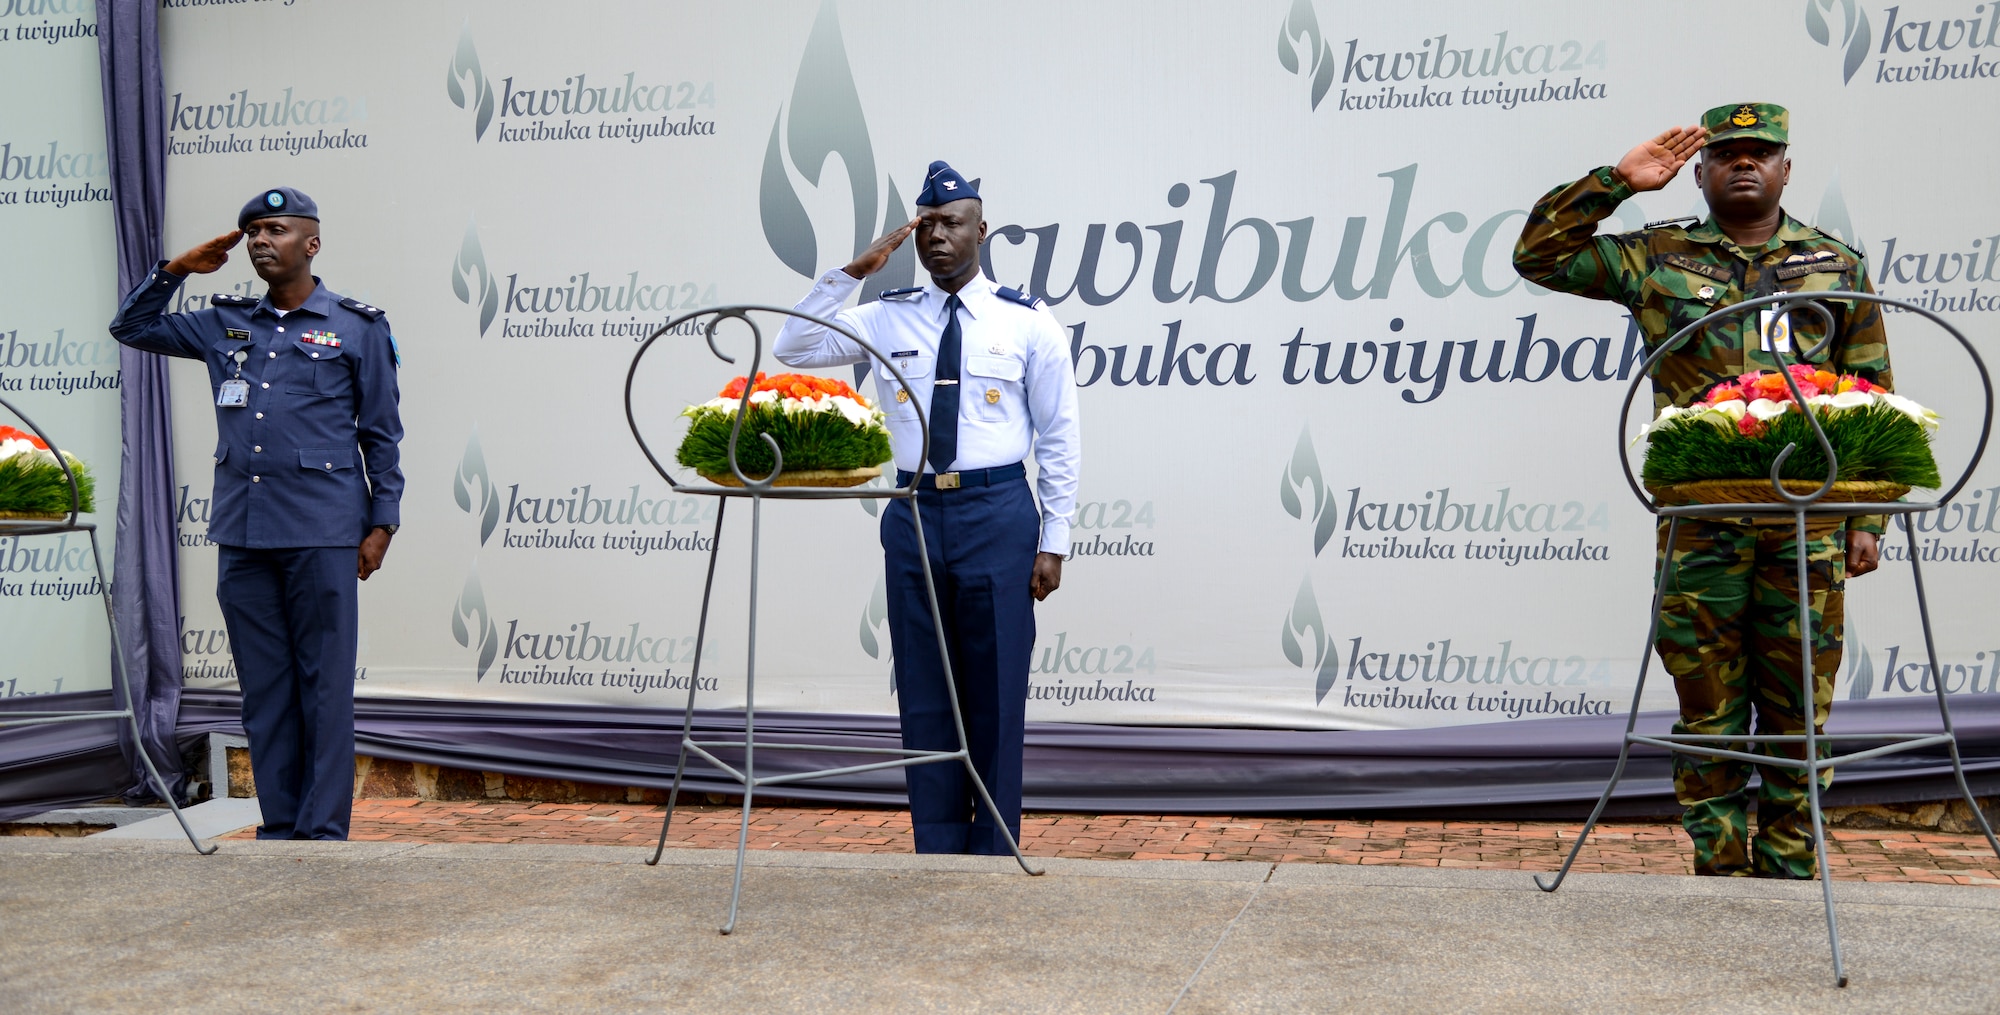 Rwanda Air Force Capt. Emmanuel Rutebuka, left, U.S. Air Force Col. Stephen Hughes, center, and Ghana Air Force Squadron Leader Ishmael Ansah render salutes during a wreath laying ceremony at the Kigali Genocide Memorial in Kigali, Rwanda, March 4, 2019. The ceremony was part of a cultural visit for the African Partnership Flight Rwanda. (U.S. Air Force photo by Tech. Sgt. Timothy Moore)